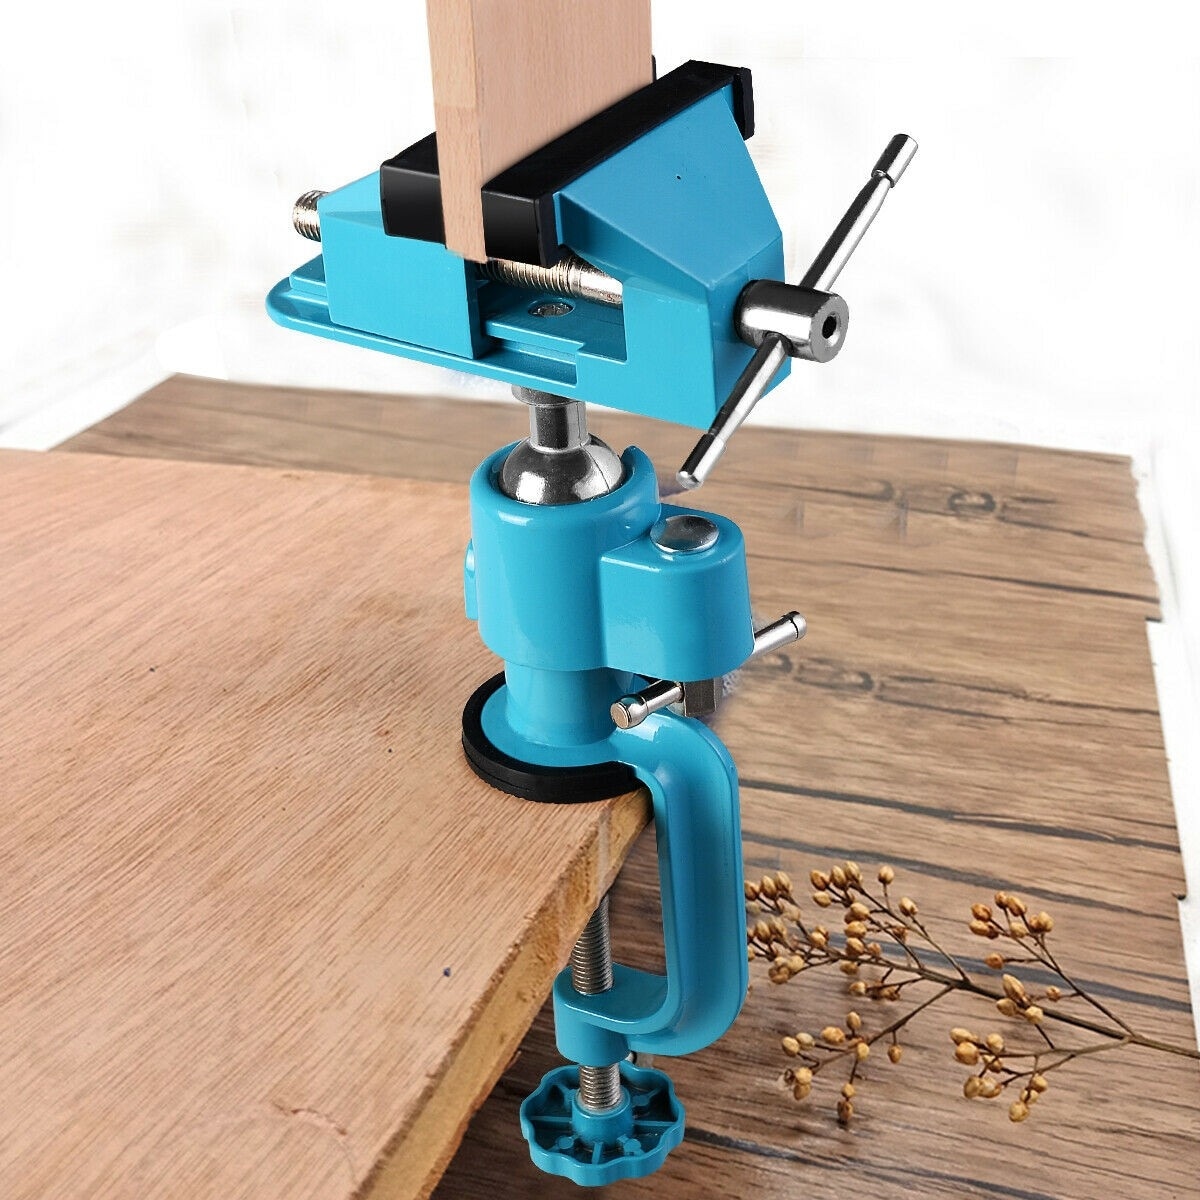 Multi 360 AngleTable Vice Adjustable Clamp Hobby Bench Swivel Jewelry Tool 